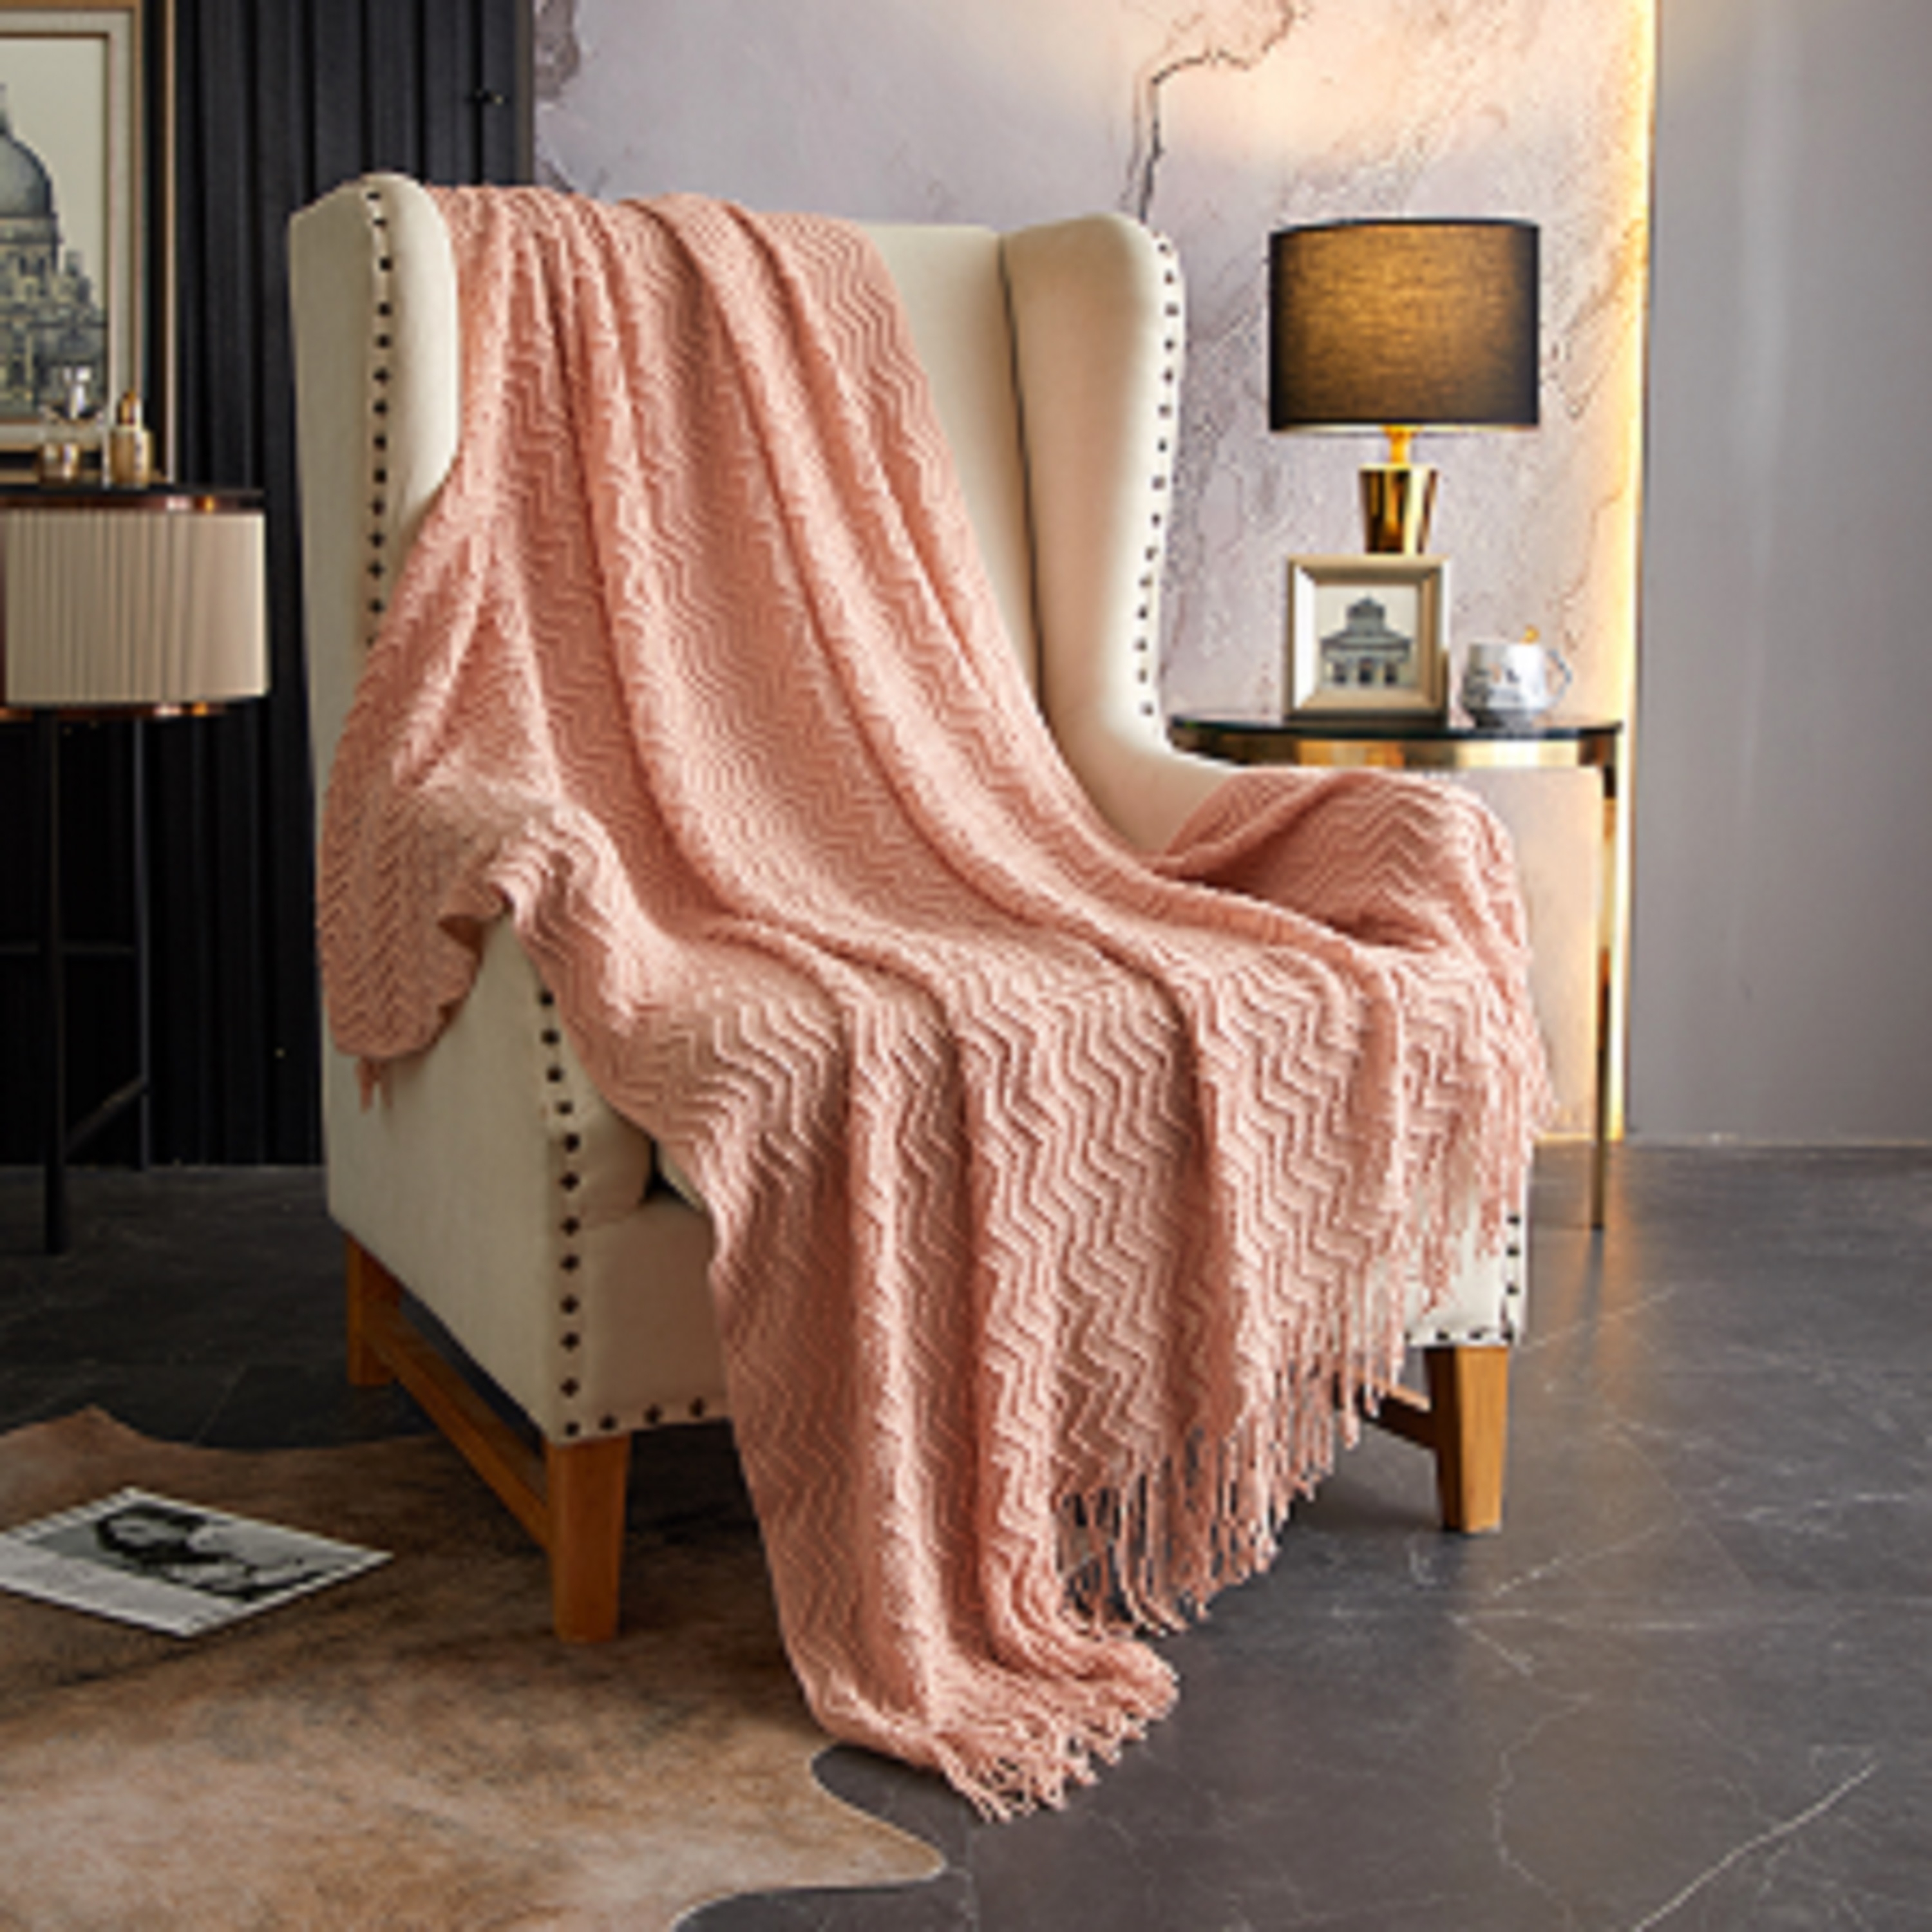 NY&C Home WowPort Woven Throw Blanket Plush Super Soft Textured Pattern - Rose